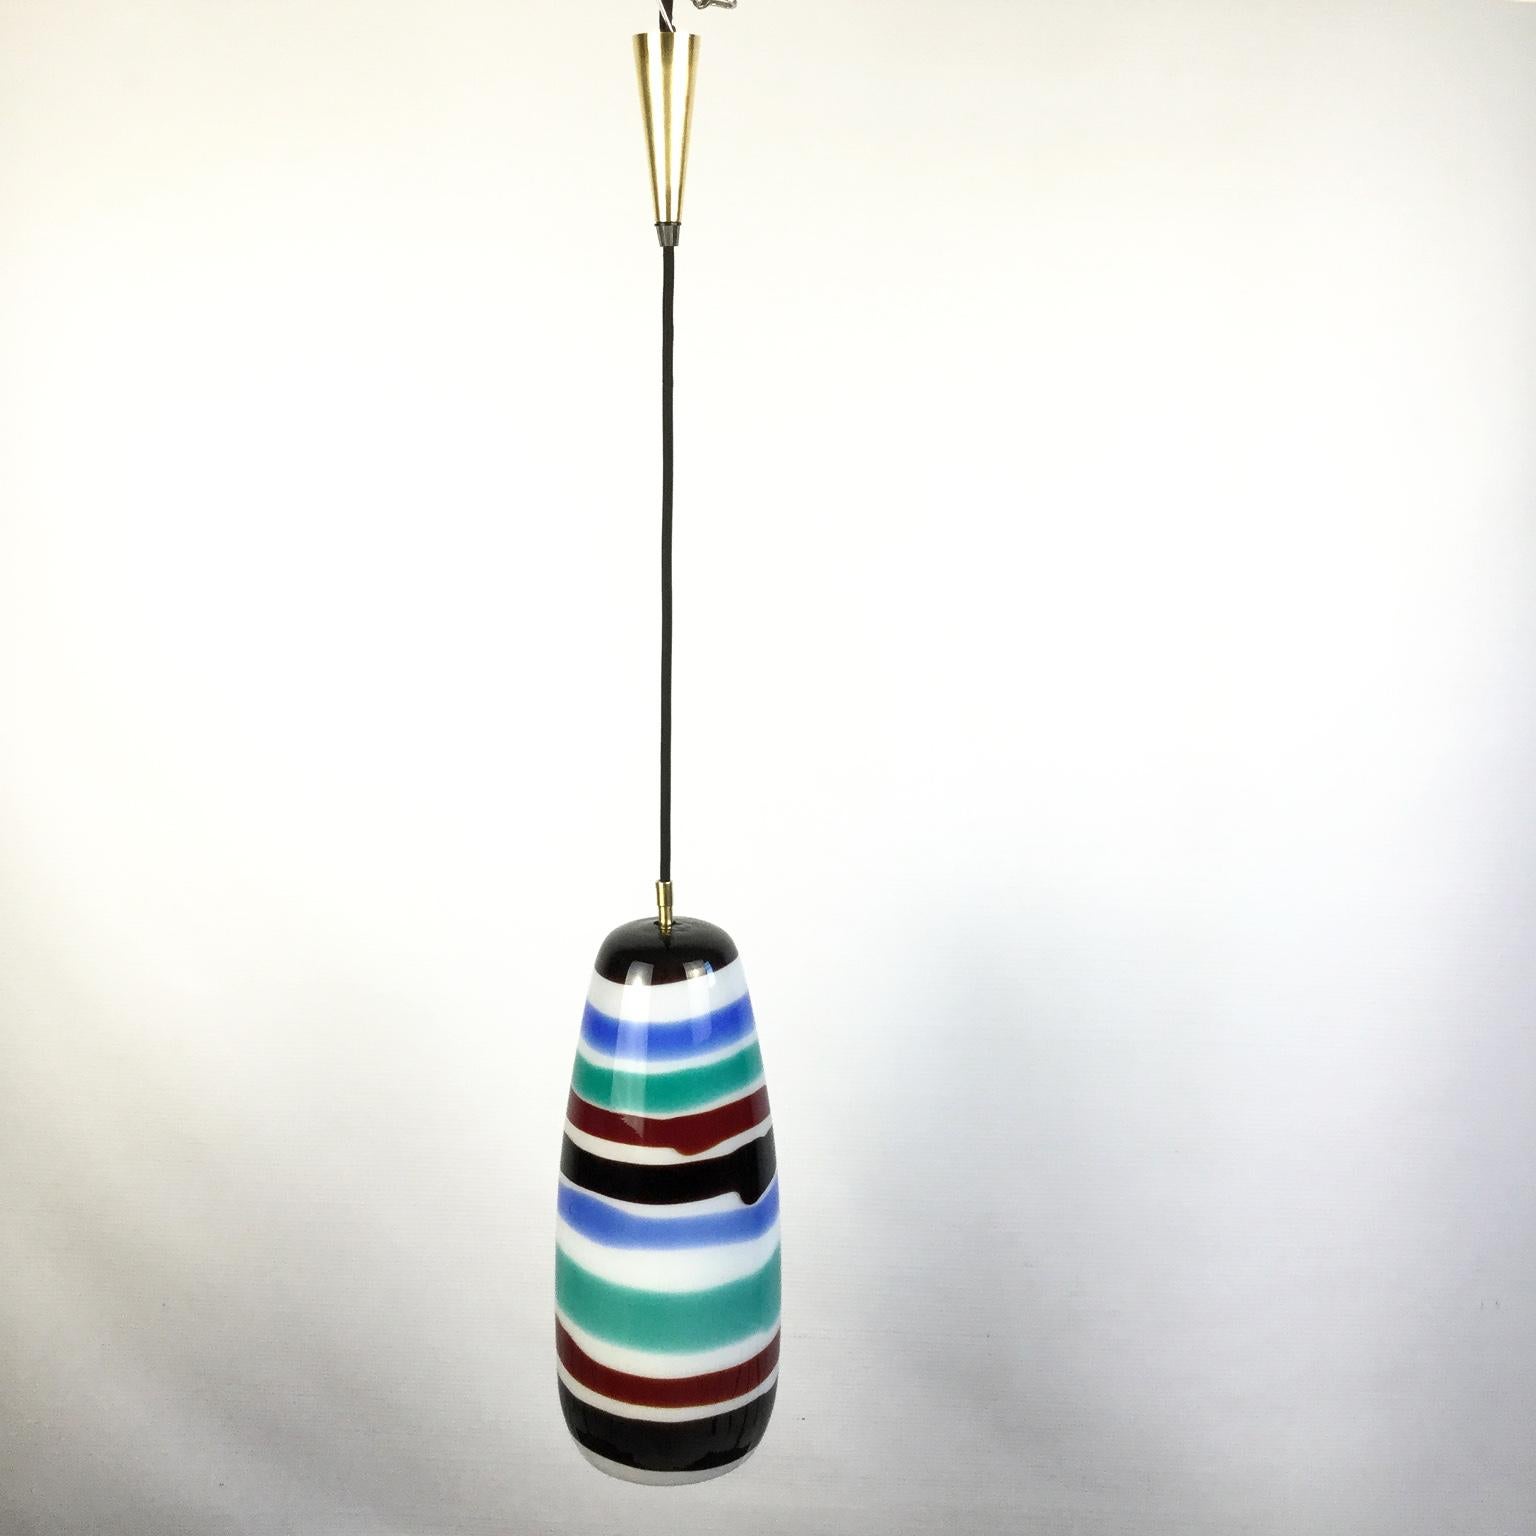 Opaline glass pendant lamp with colored bands also known as the 